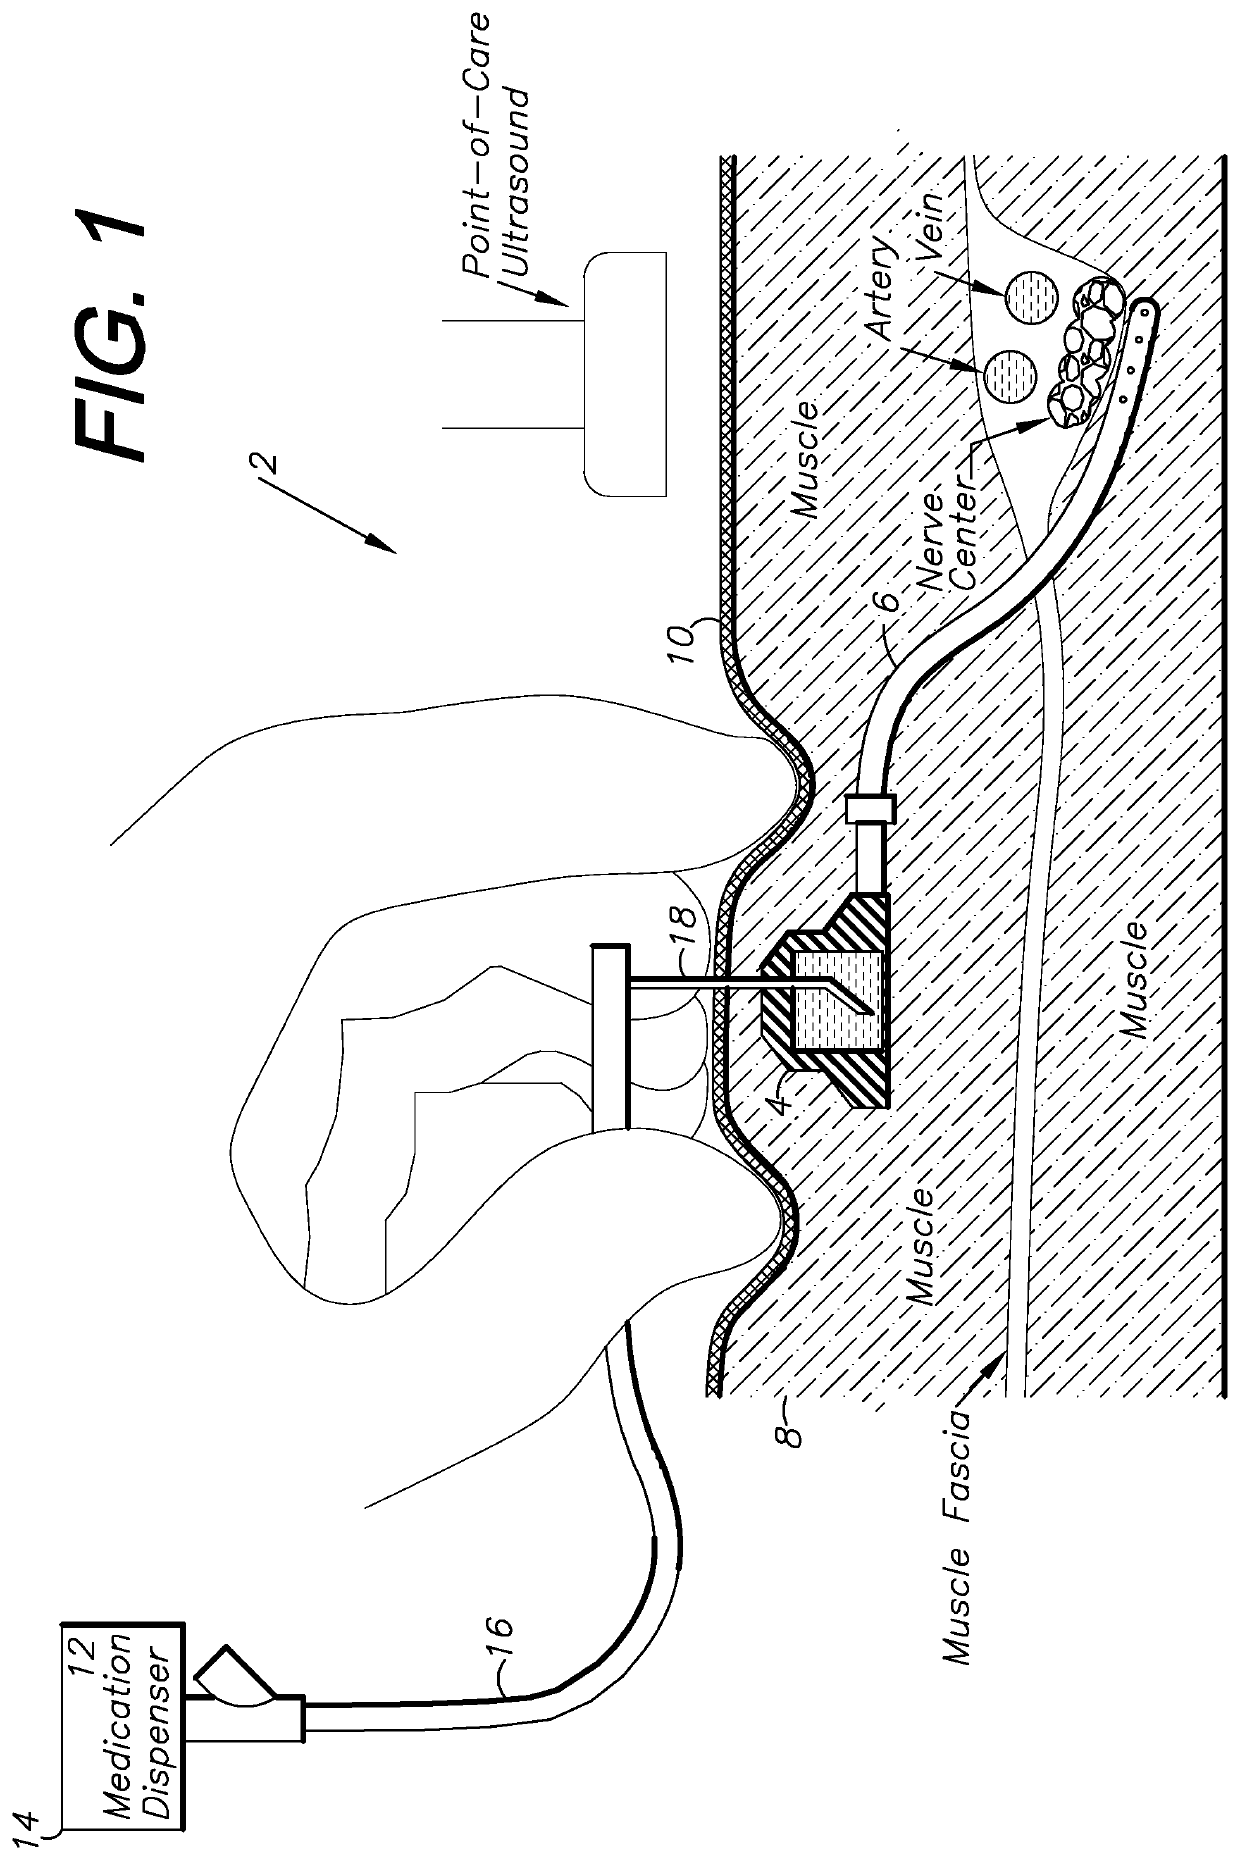 Catheter system with subcutaneous, implantable port and ultrasound-guided placement method